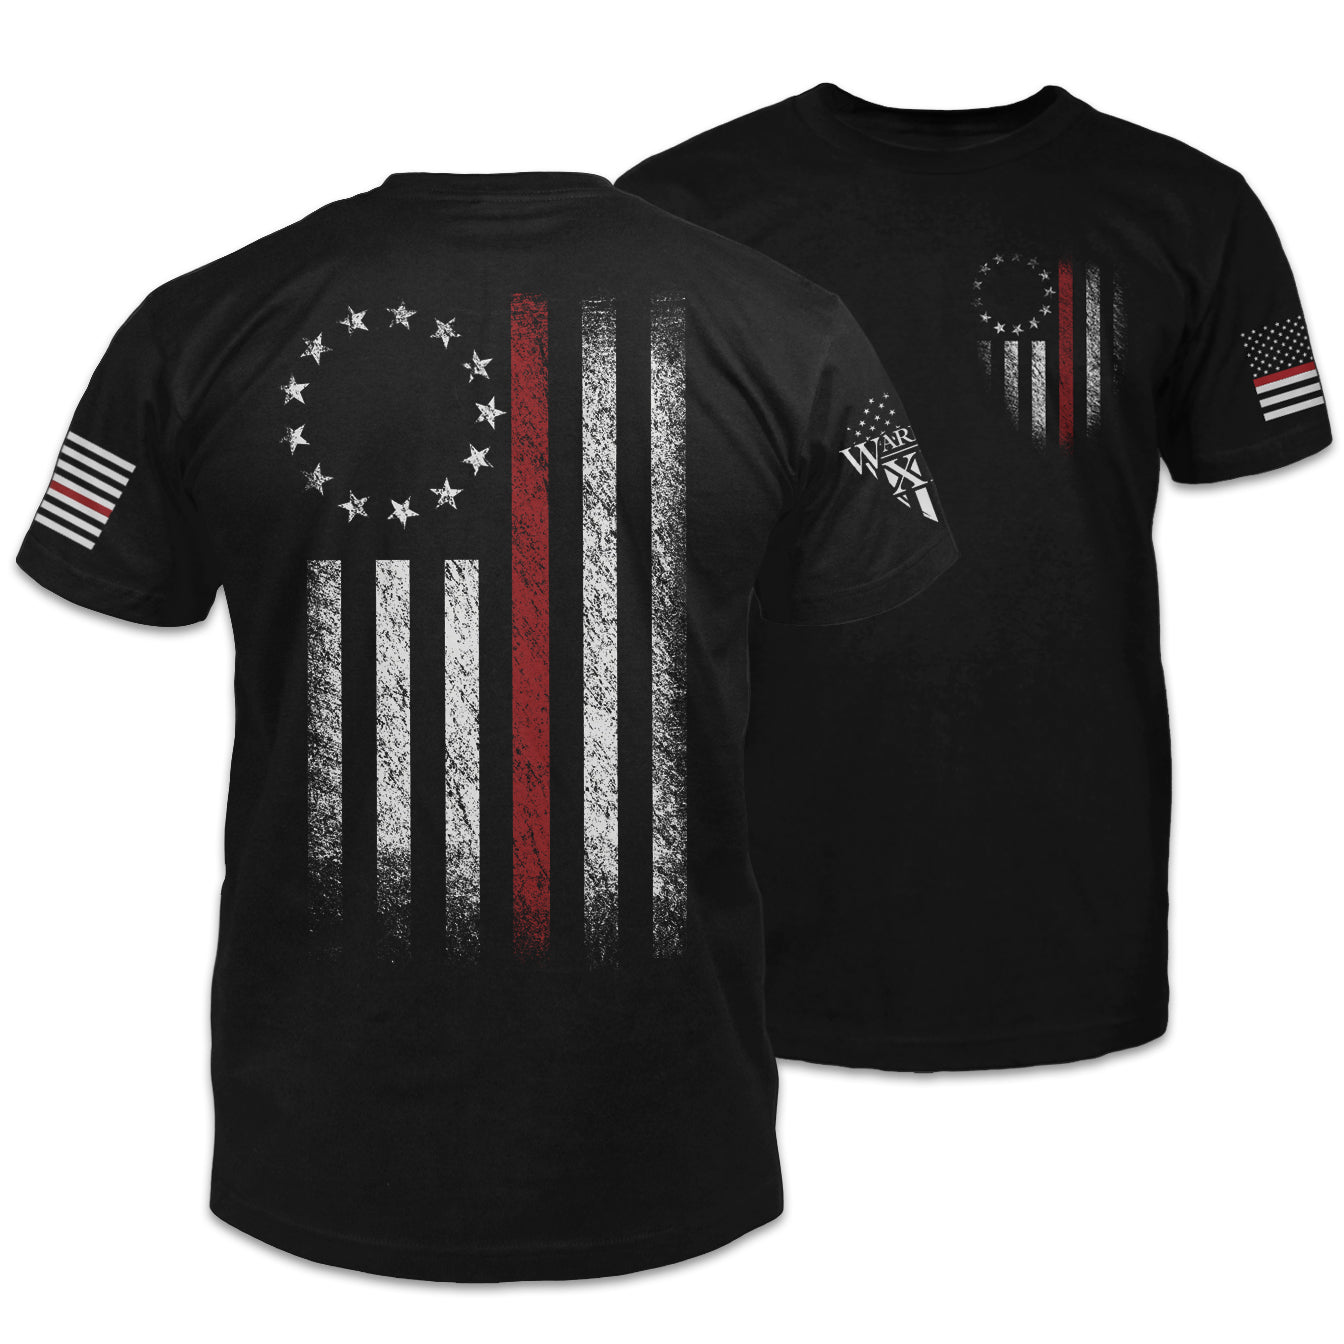 Front & back black t-shirt that features a Thin Red Line Betsy Ross Flag shirt printed on the shirt.